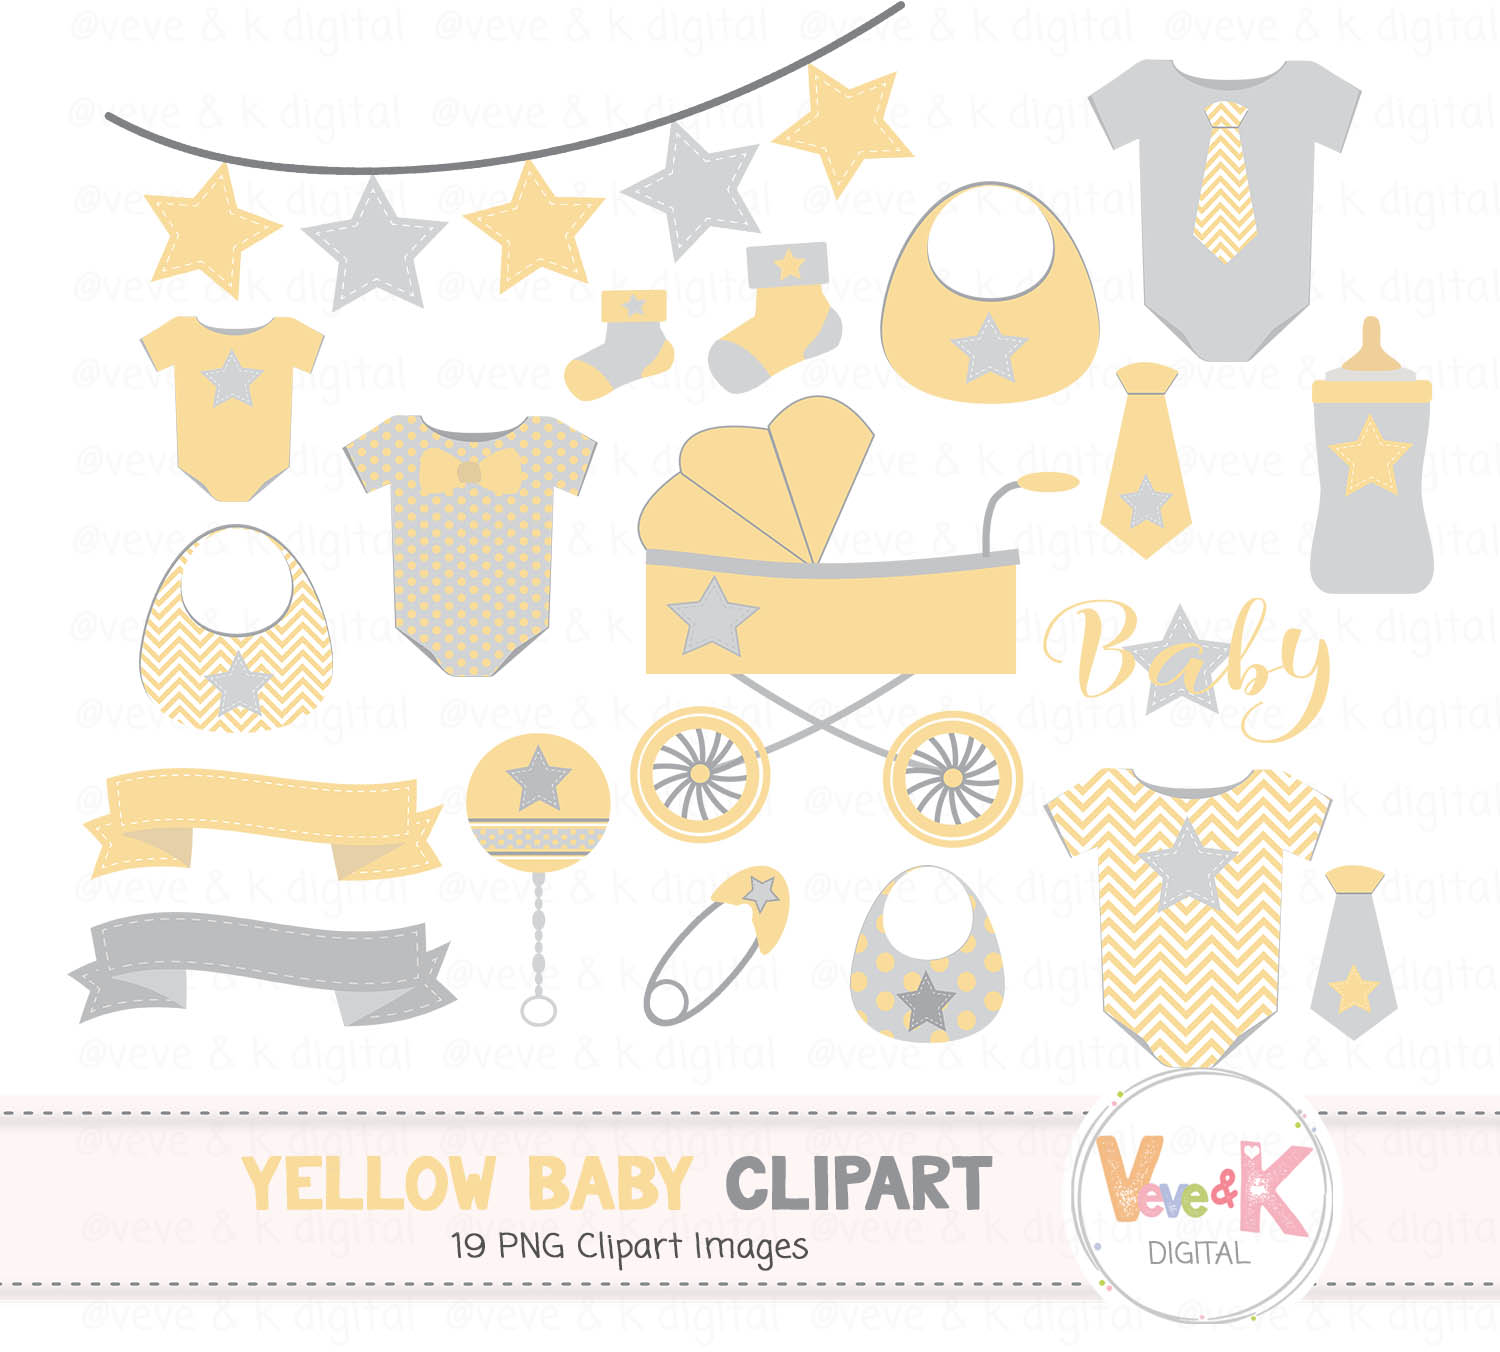 Yellow Baby Clipart, Gender Neutral Baby Clipart, Baby Shower Clipart, Baby  Graphics, Yellow and Gray Baby, Baby Shower Clipart, Baby Pack